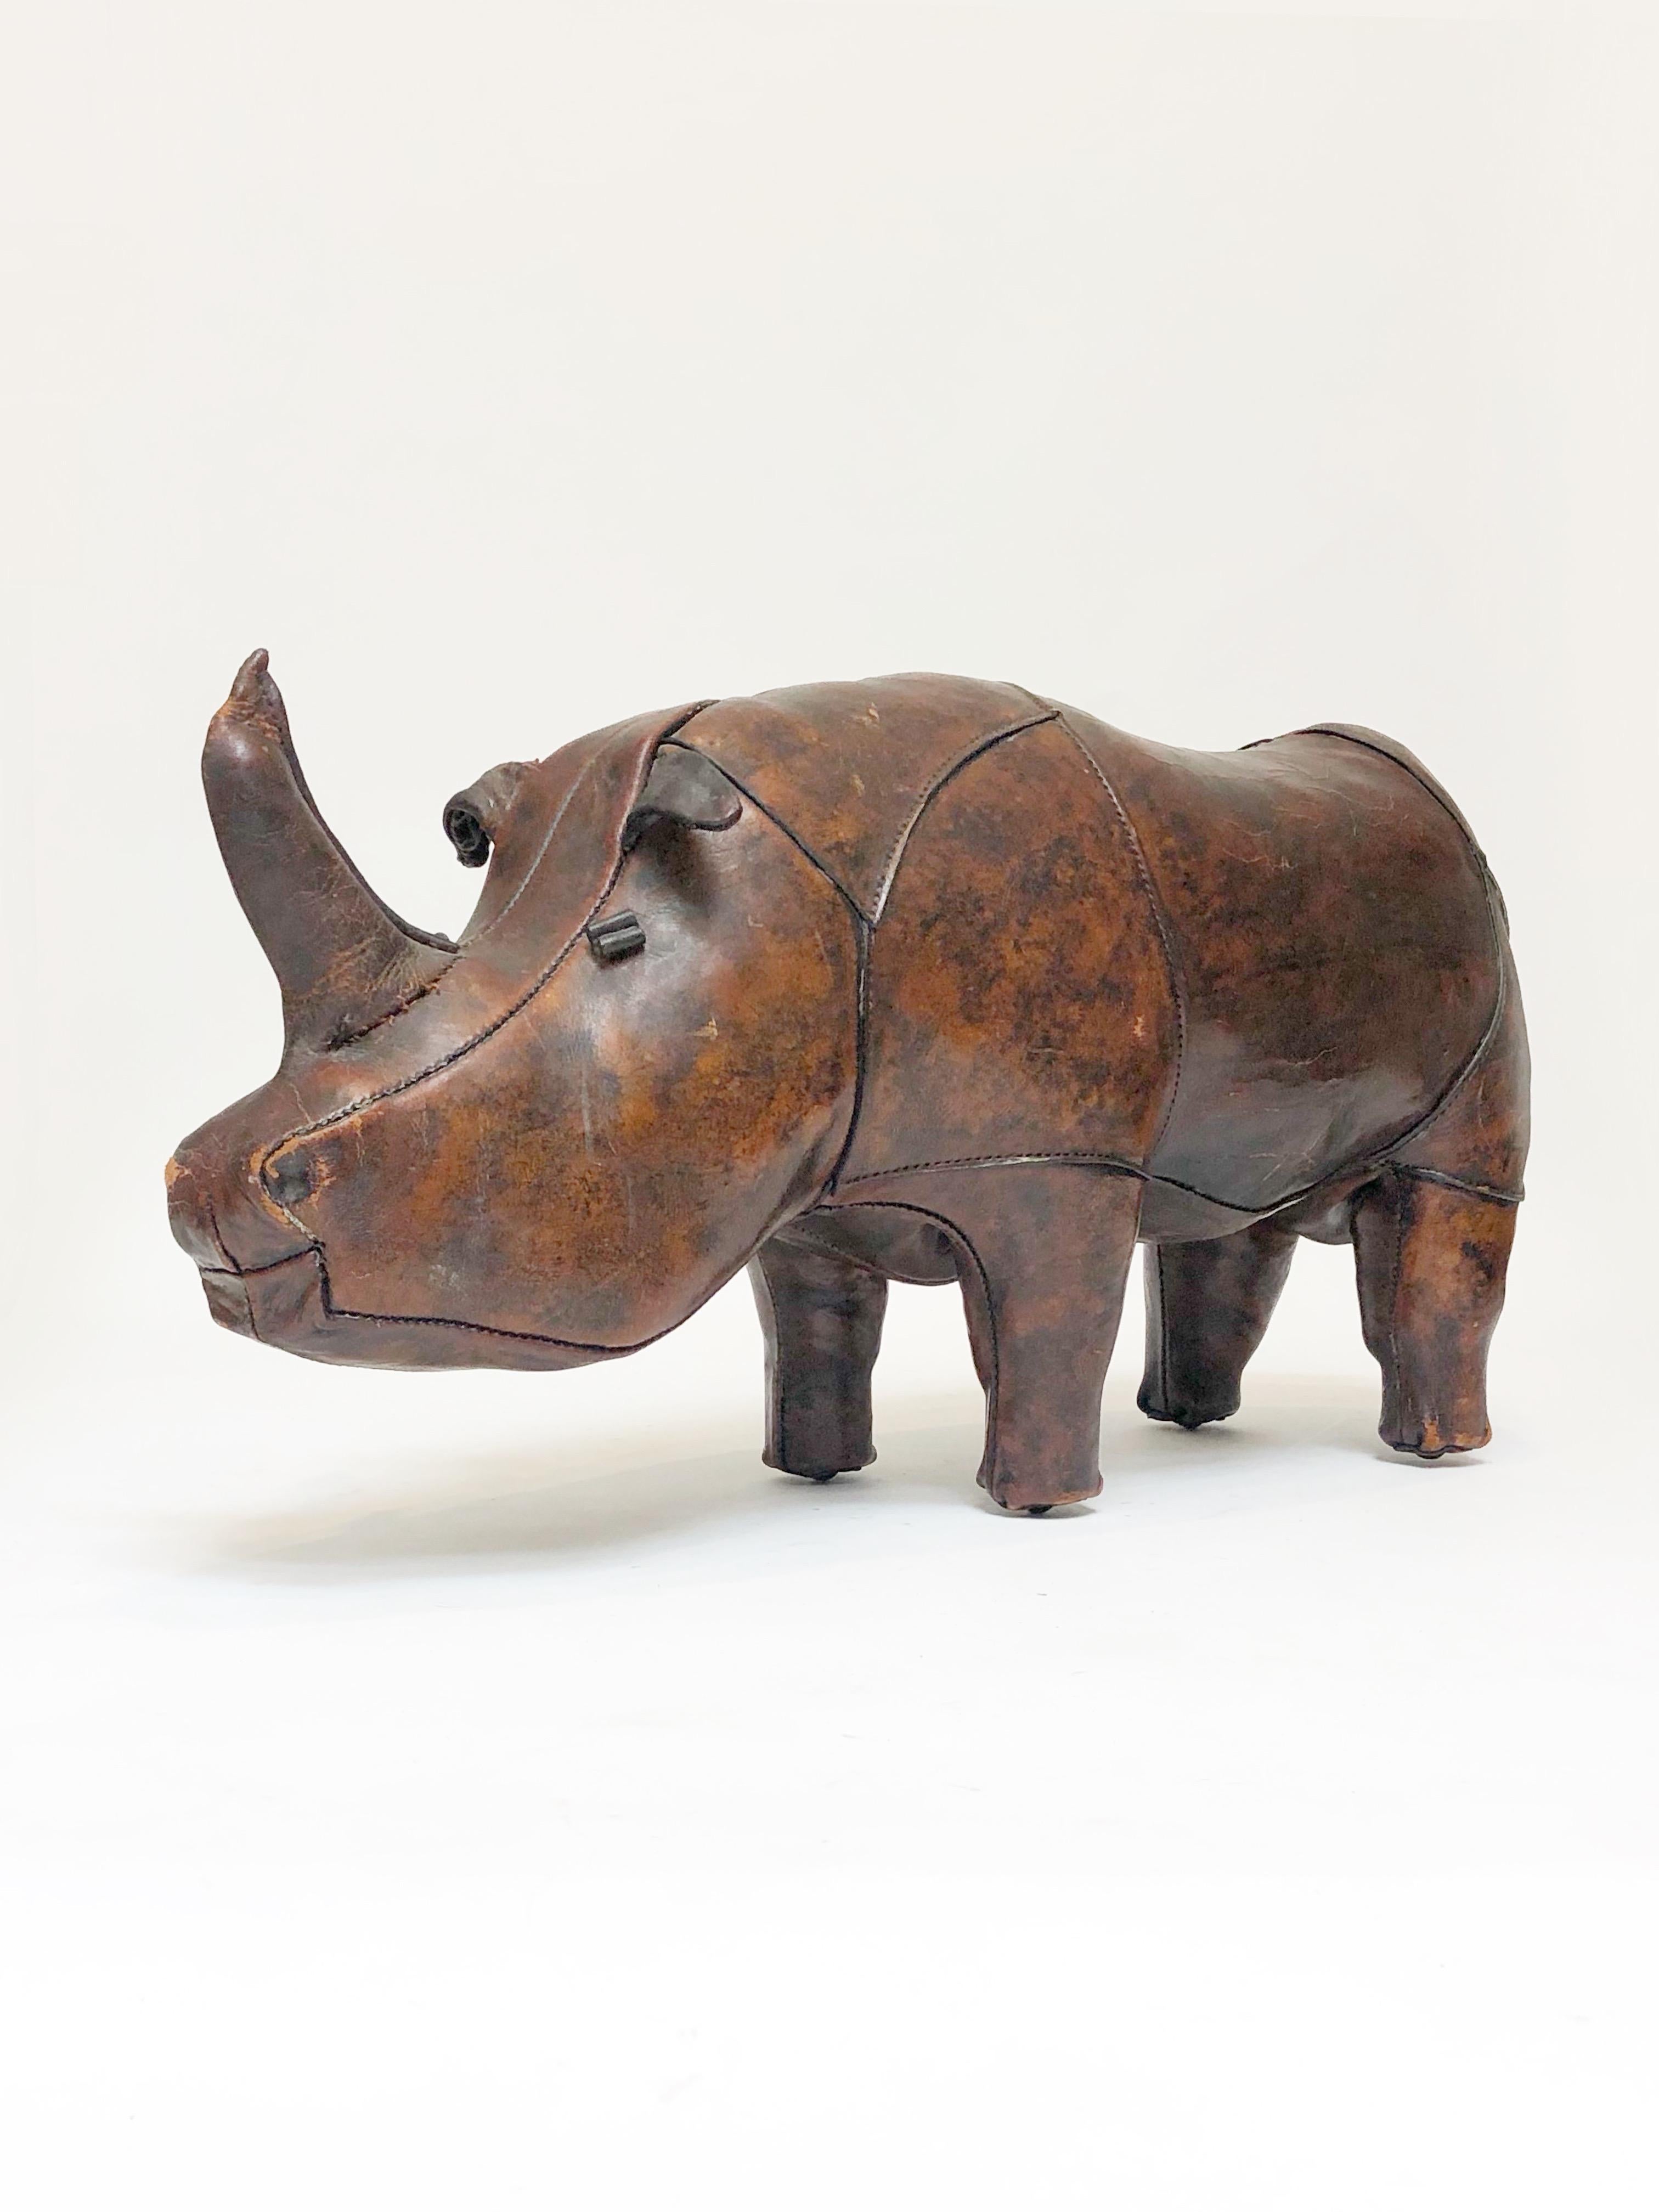 Patinated Leather Rhinoceros Footstool by Dimitri Omersa for Abercrombie and Fitch, Signed